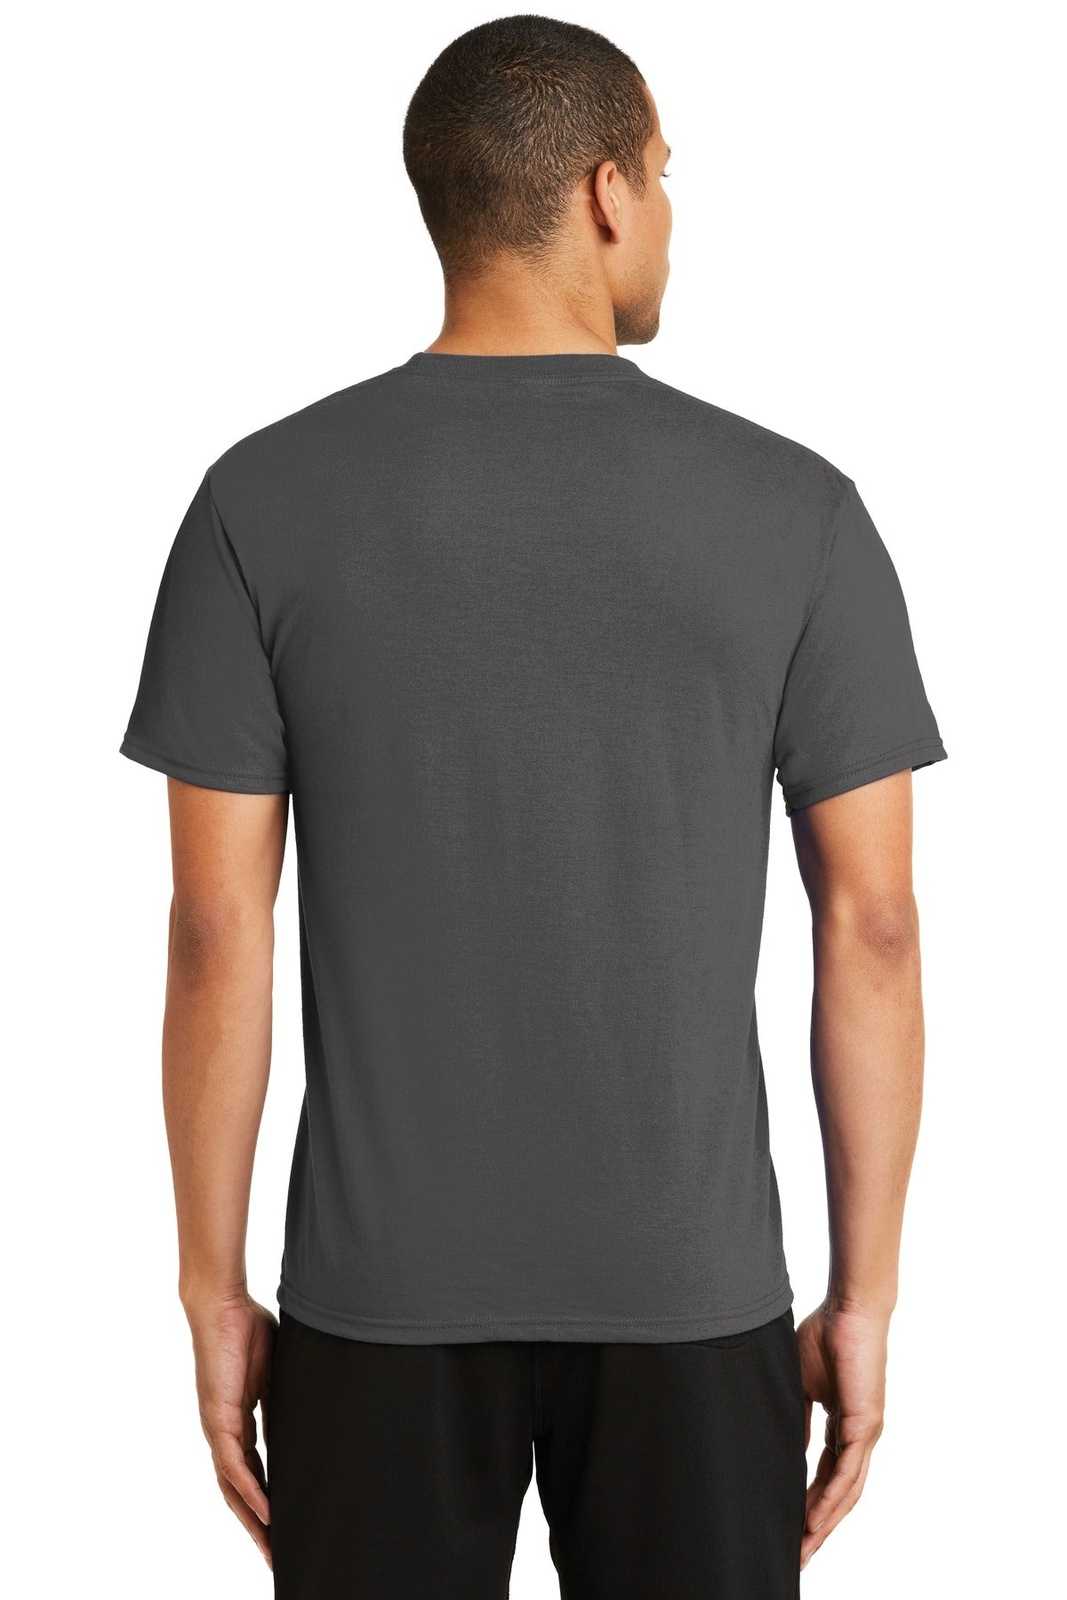 Port & Company PC381 Performance Blend Tee - Charcoal - HIT a Double - 1